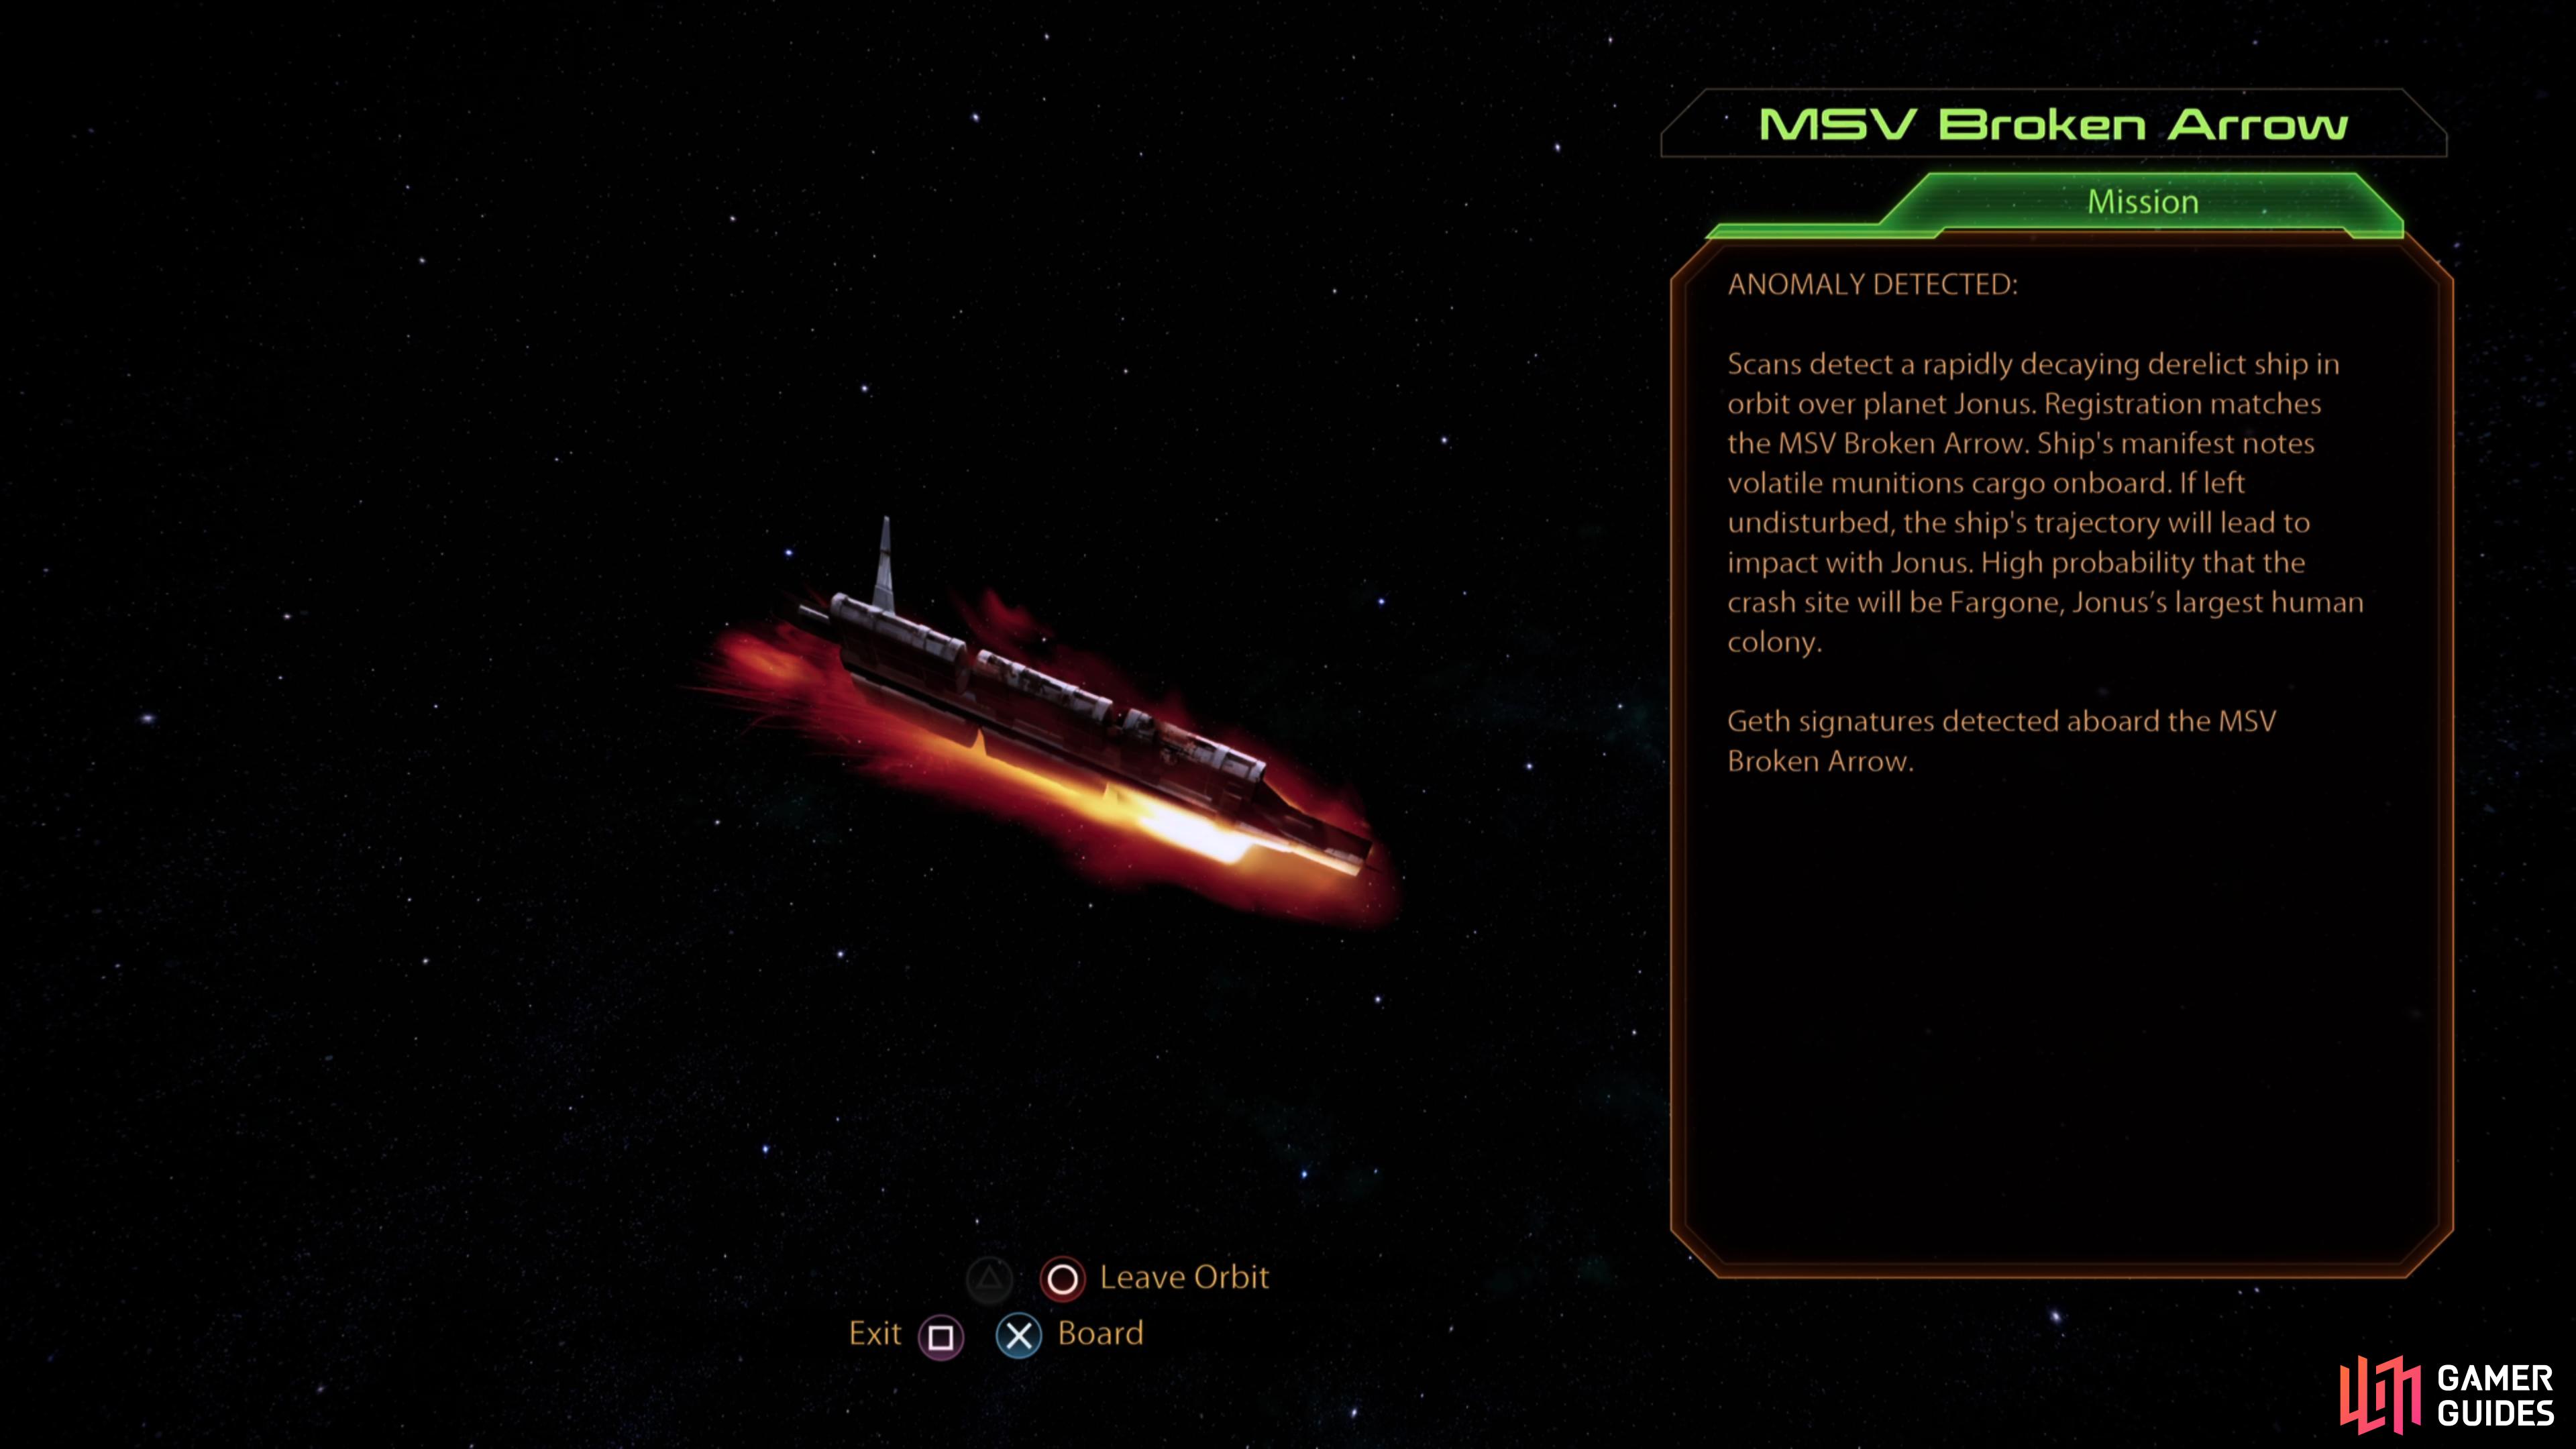 The assignment "N7: Imminent Ship Crash" takes place aboard the MSV Broken Arrow.